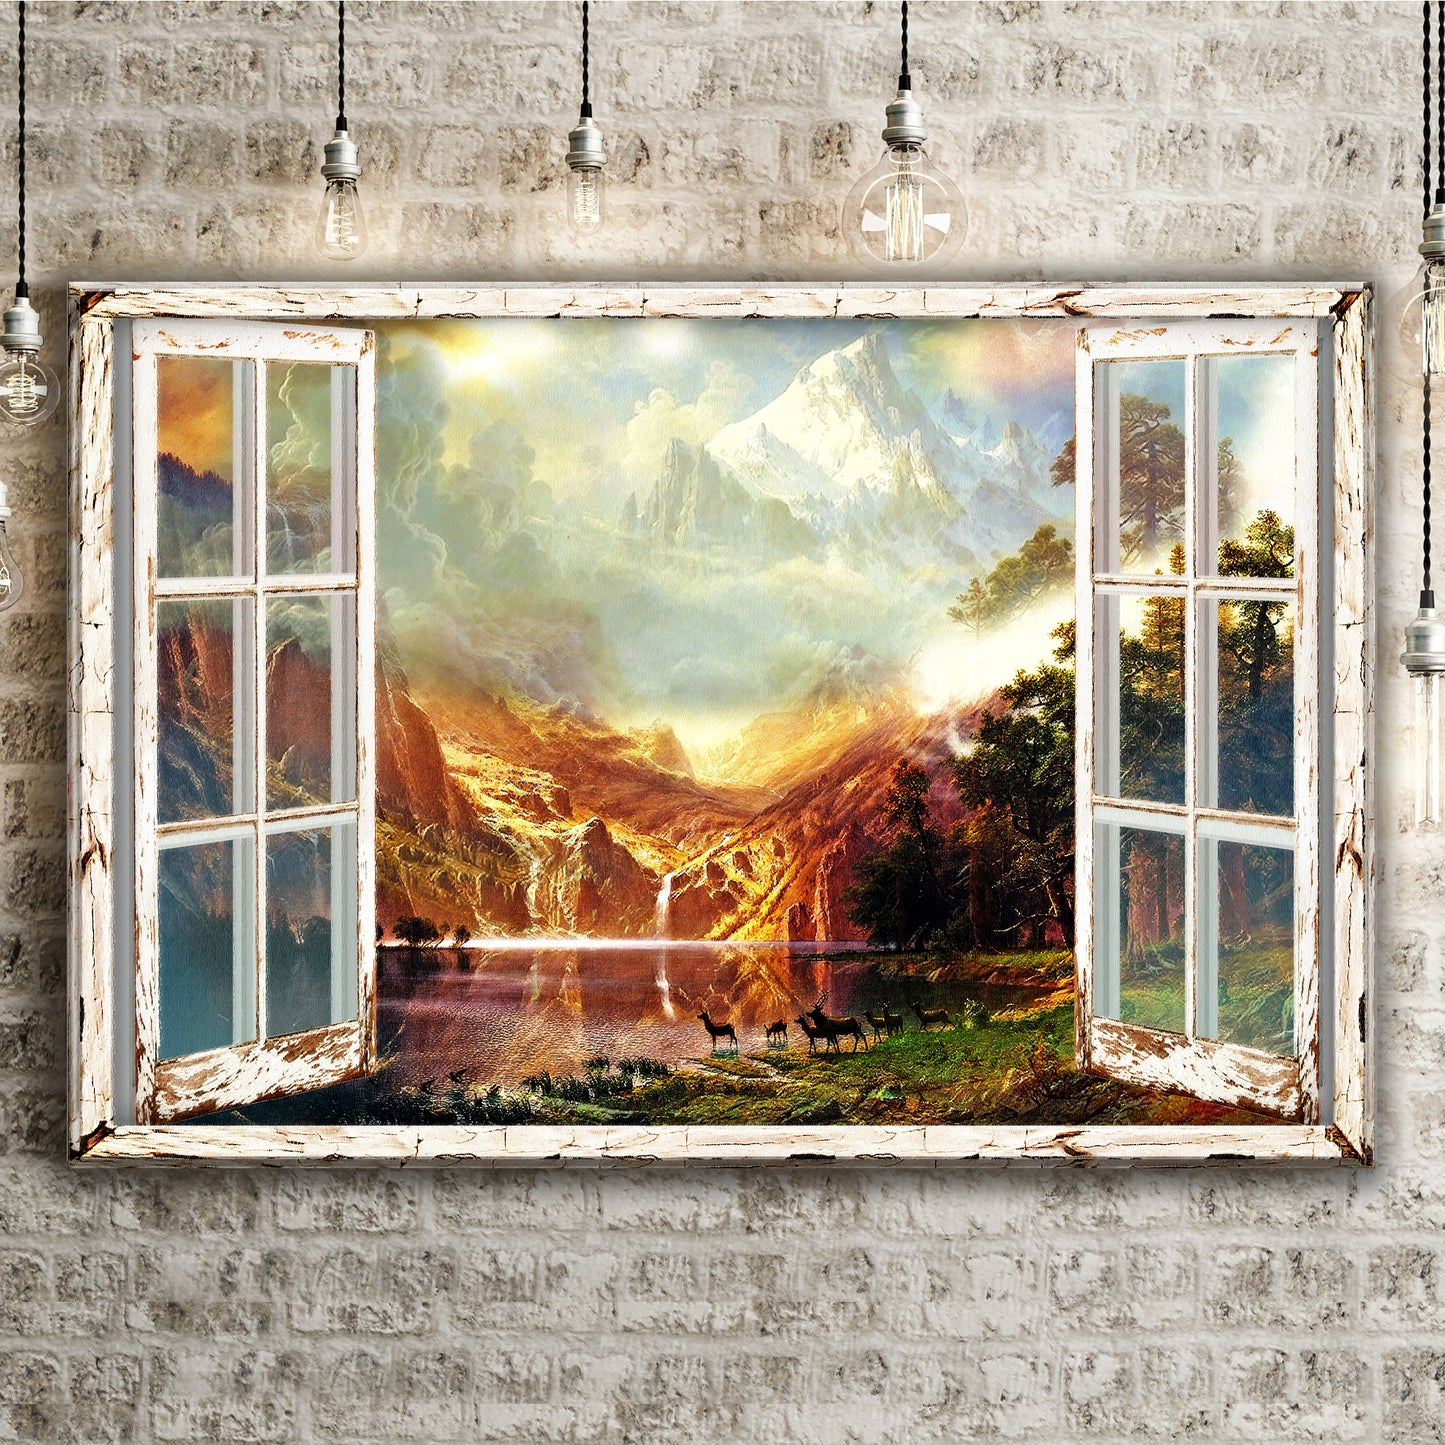 Lake By The Window Canvas Wall Art - Image by Tailored Canvases